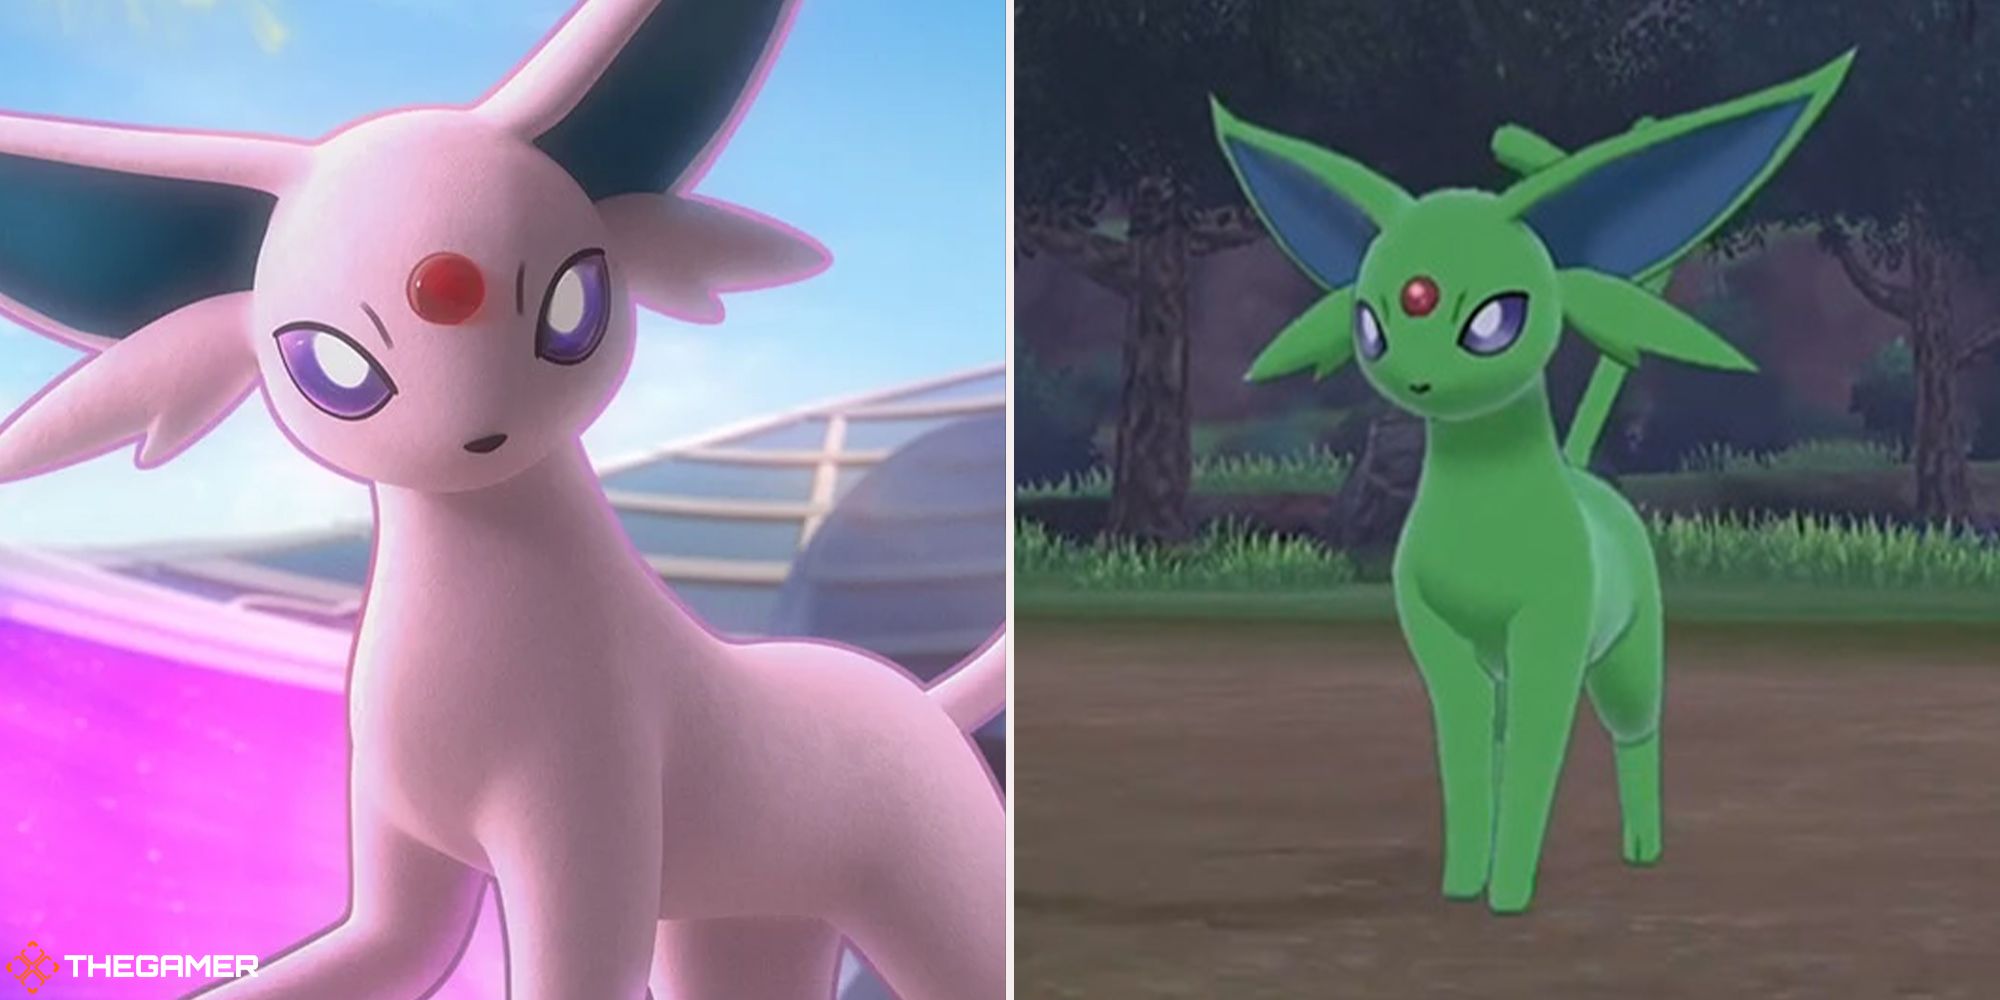 A split image of an Espeon in Pokemon Unite on the left and a shiny Espeon on the right.